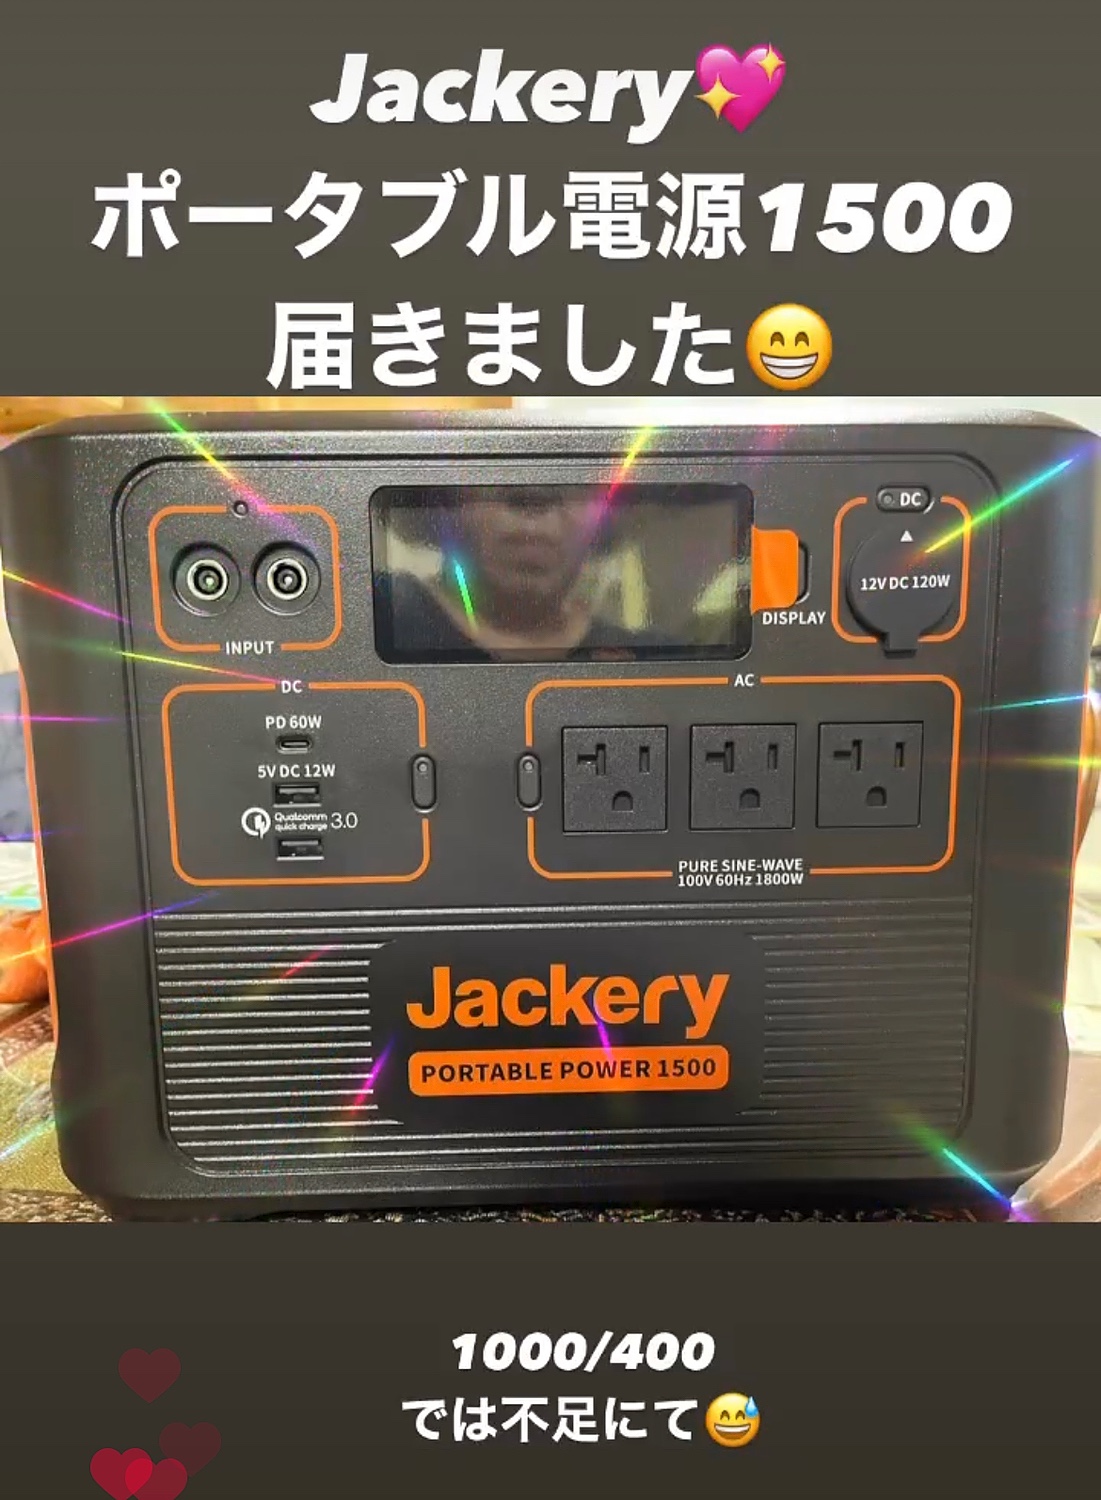 jackery ジャクリーポータブル電源 1500 PTB152 1534Wh www.pothashang.in